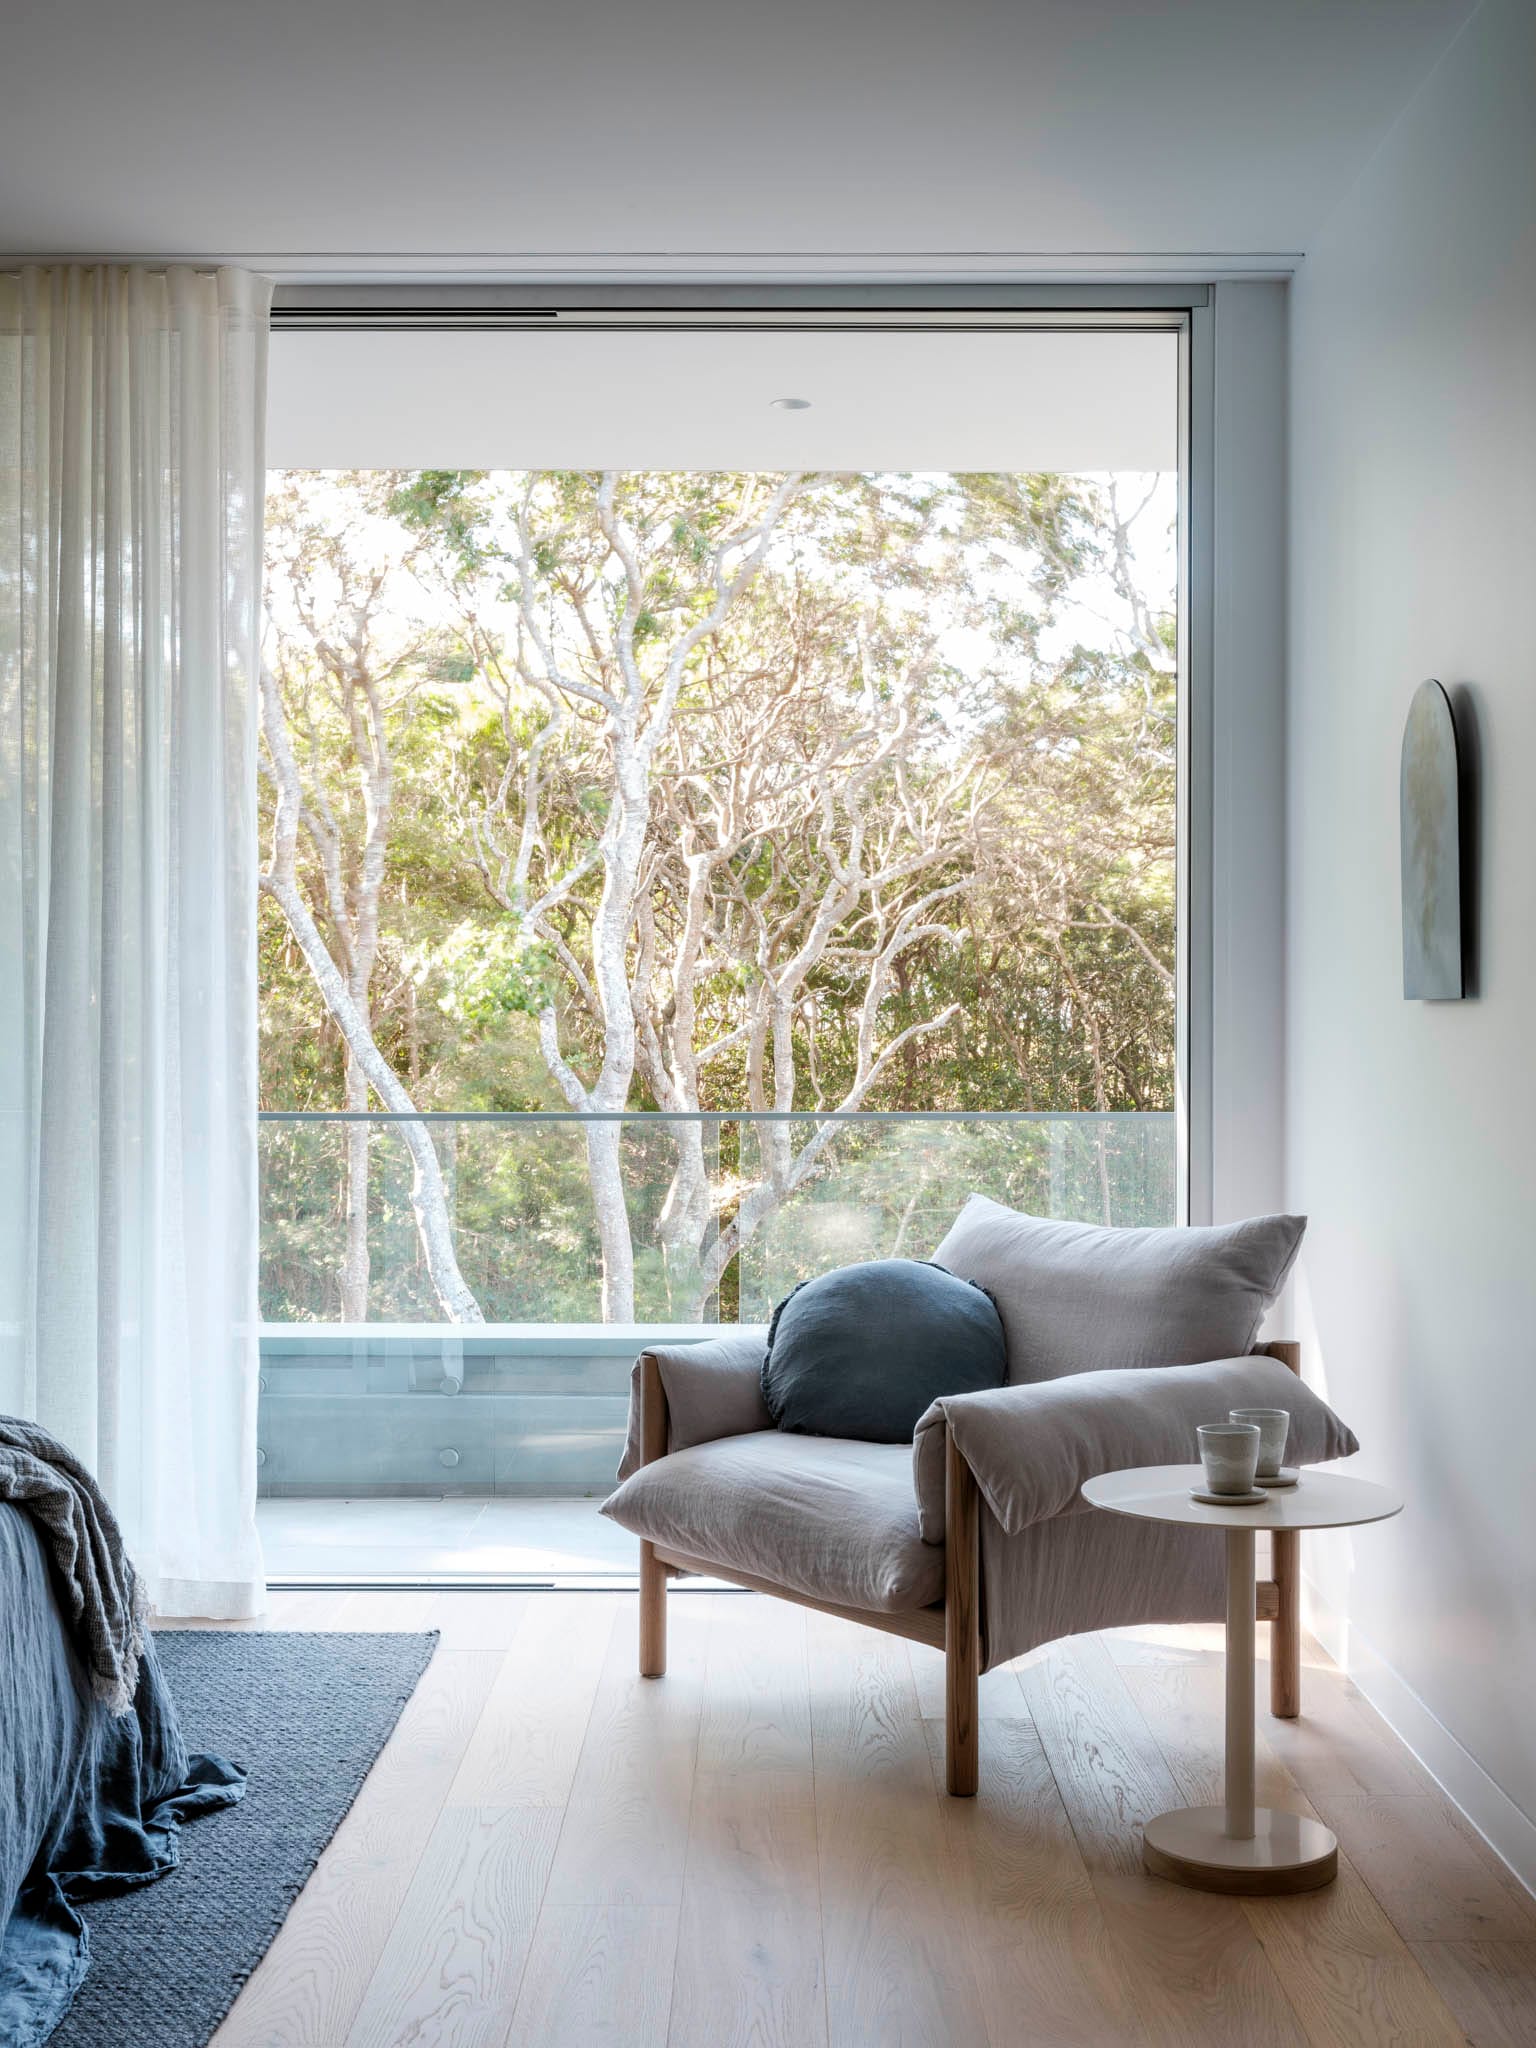 Kasa Byron Bay. Photography by Tom Ferguson. Blush and timber armchair with side table in front of floor-to-ceiling window overlooking trees. Timber floors in room.